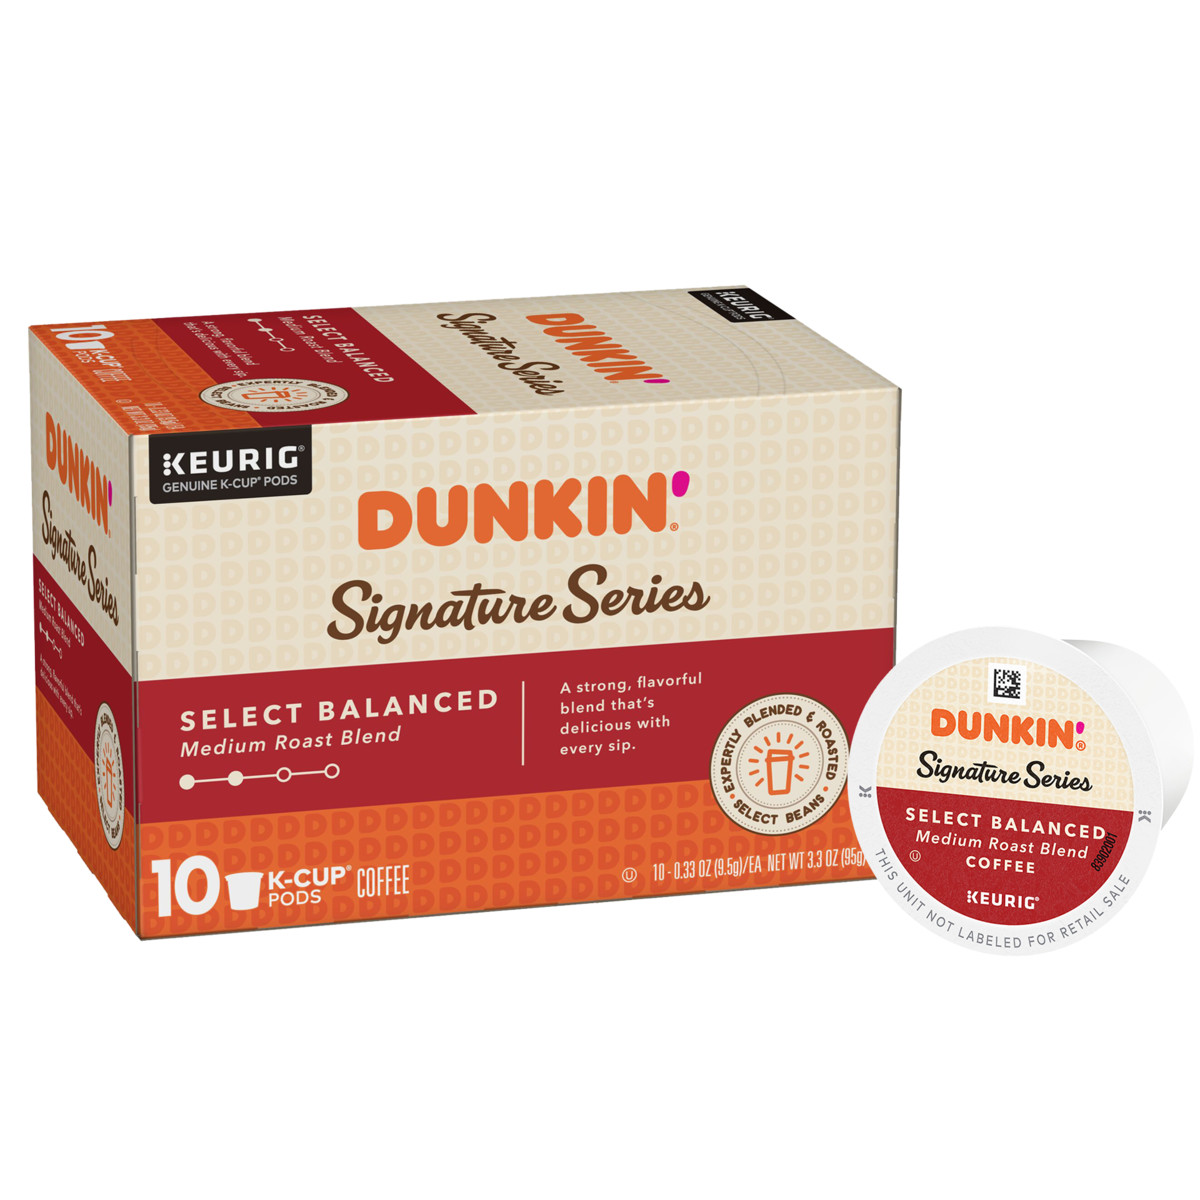 Dunkin'® Signature Series Select Balanced coffee K-Cup® pods in a beige, red, and orange box with a K-Cup® pod on its side in the foreground